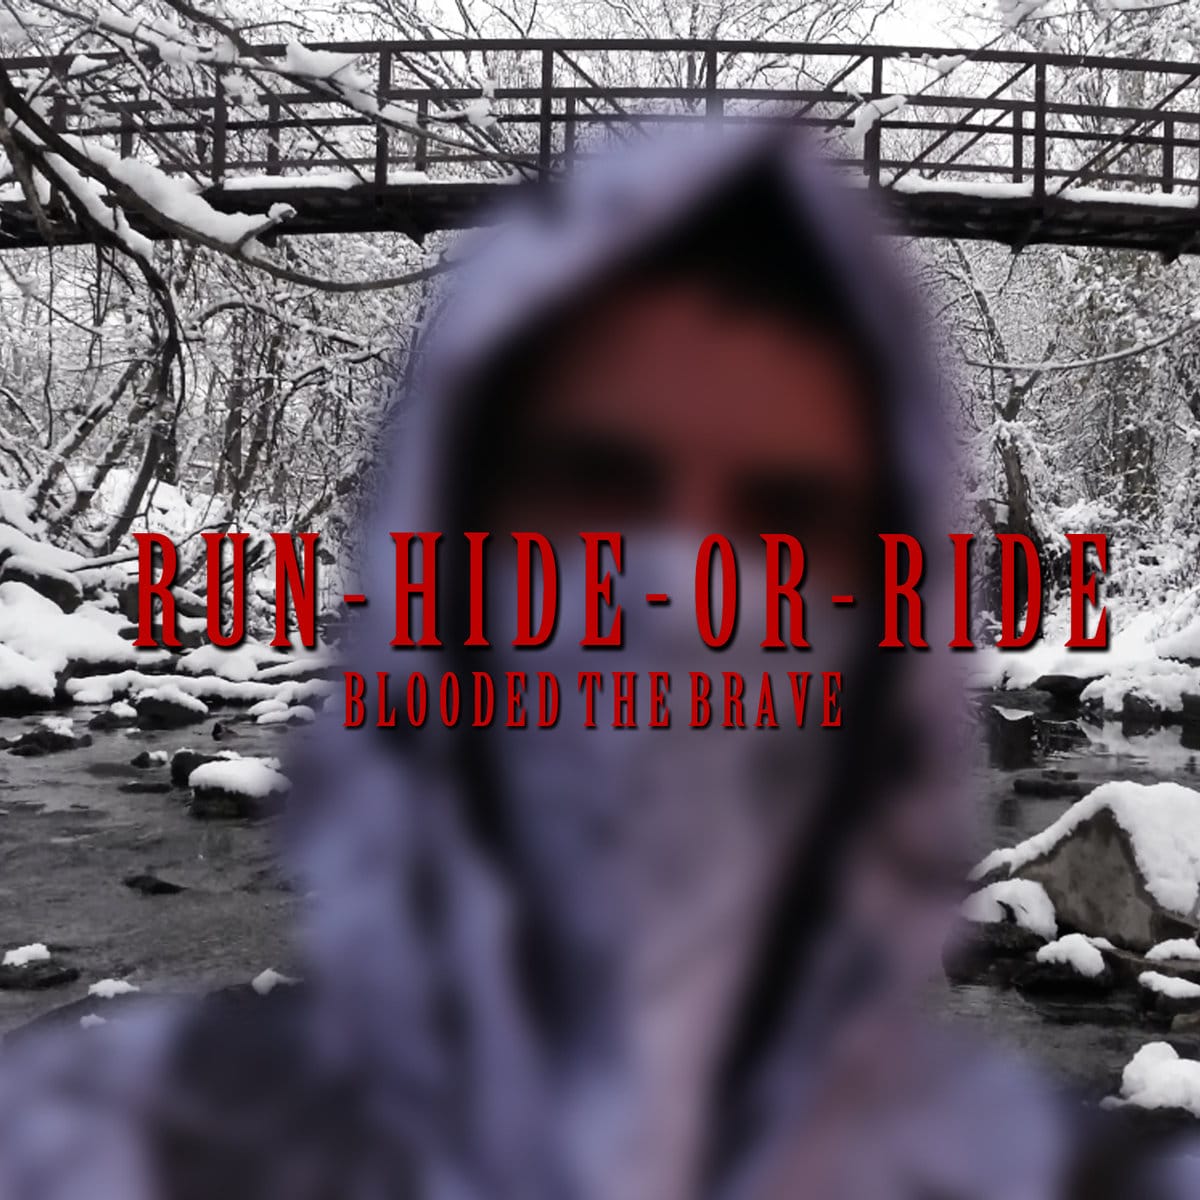 Blooded The Brave - "Run - Hide - Or - Ride" (Video)